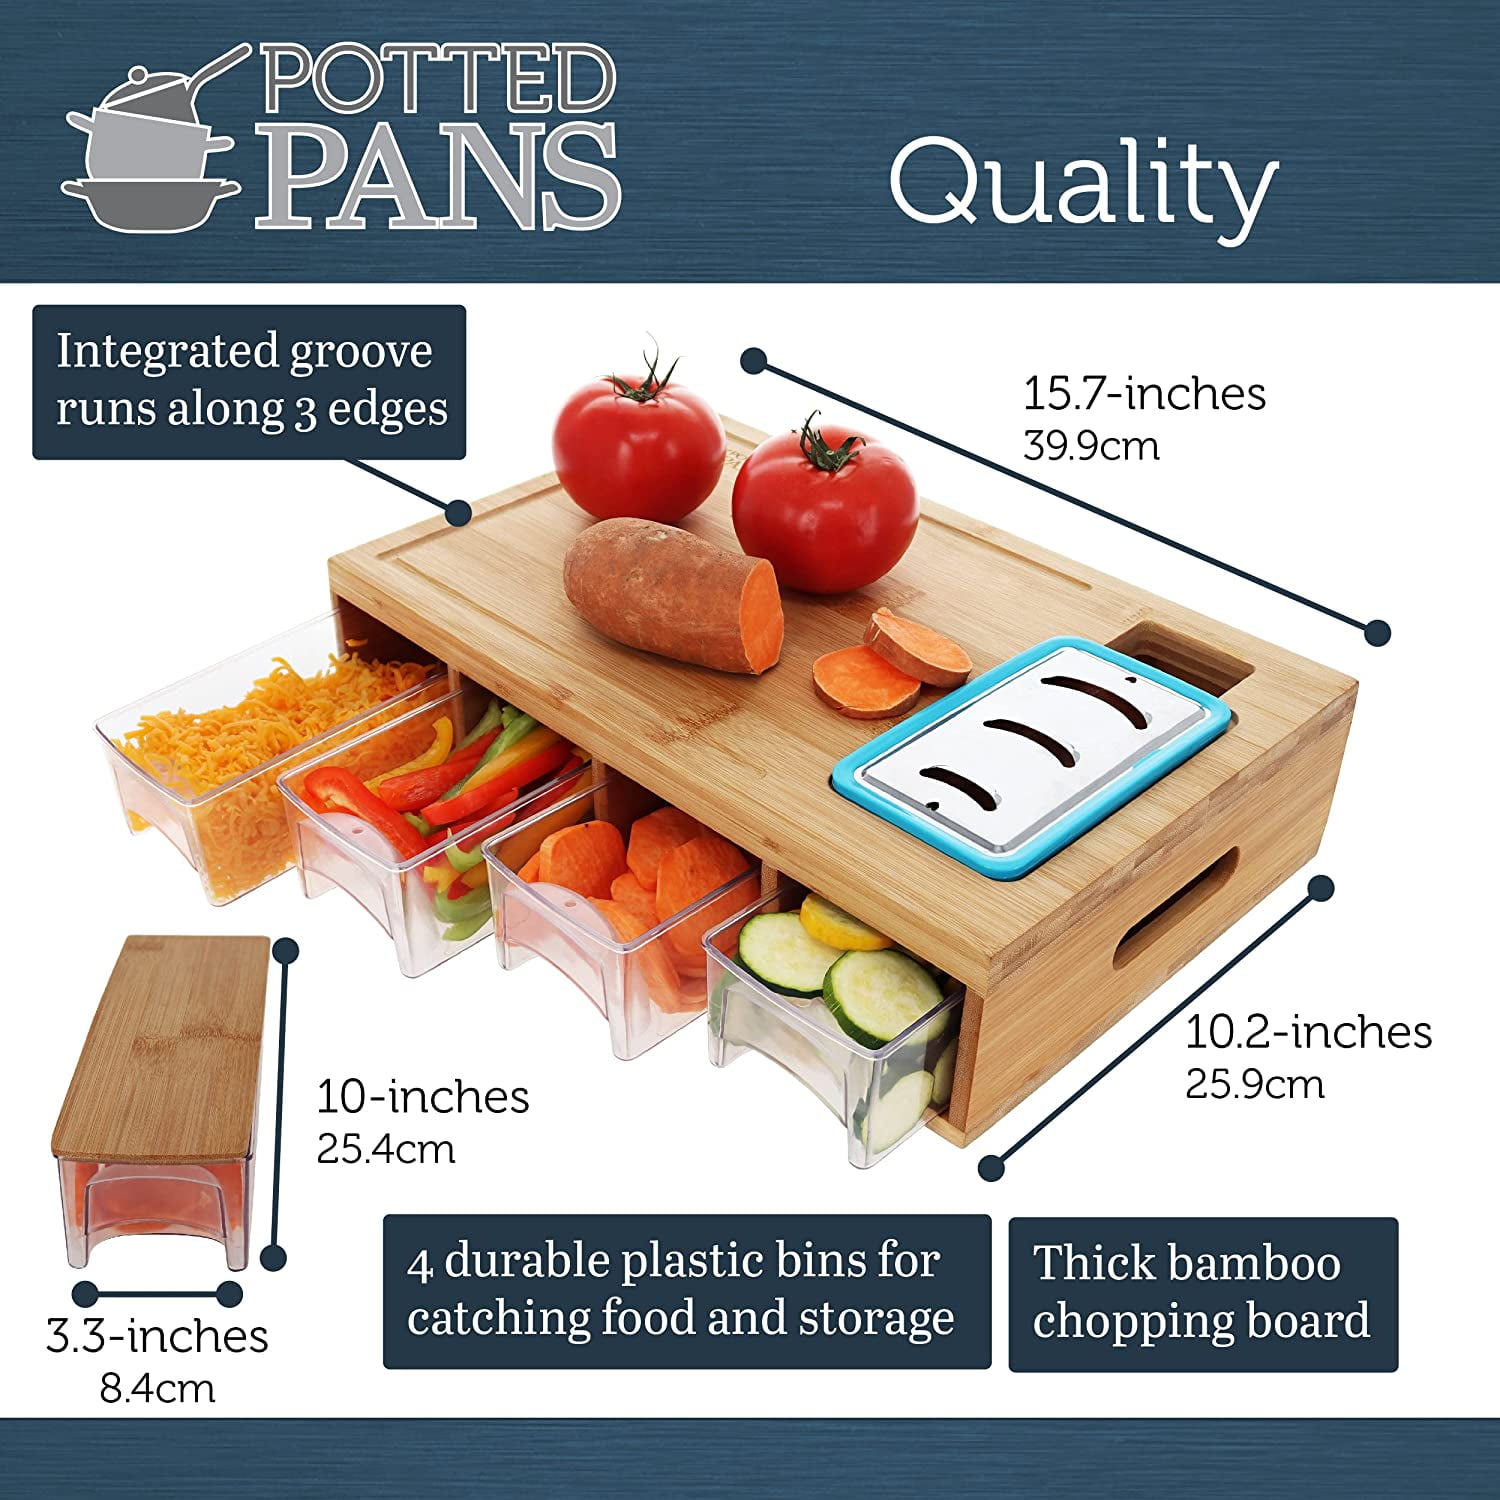 Chopping Board with Storage and Food Prep Station - Meal Prep Station,  Bamboo Cutting Board with Juice Grooves, Four Containers & Assorted Graters